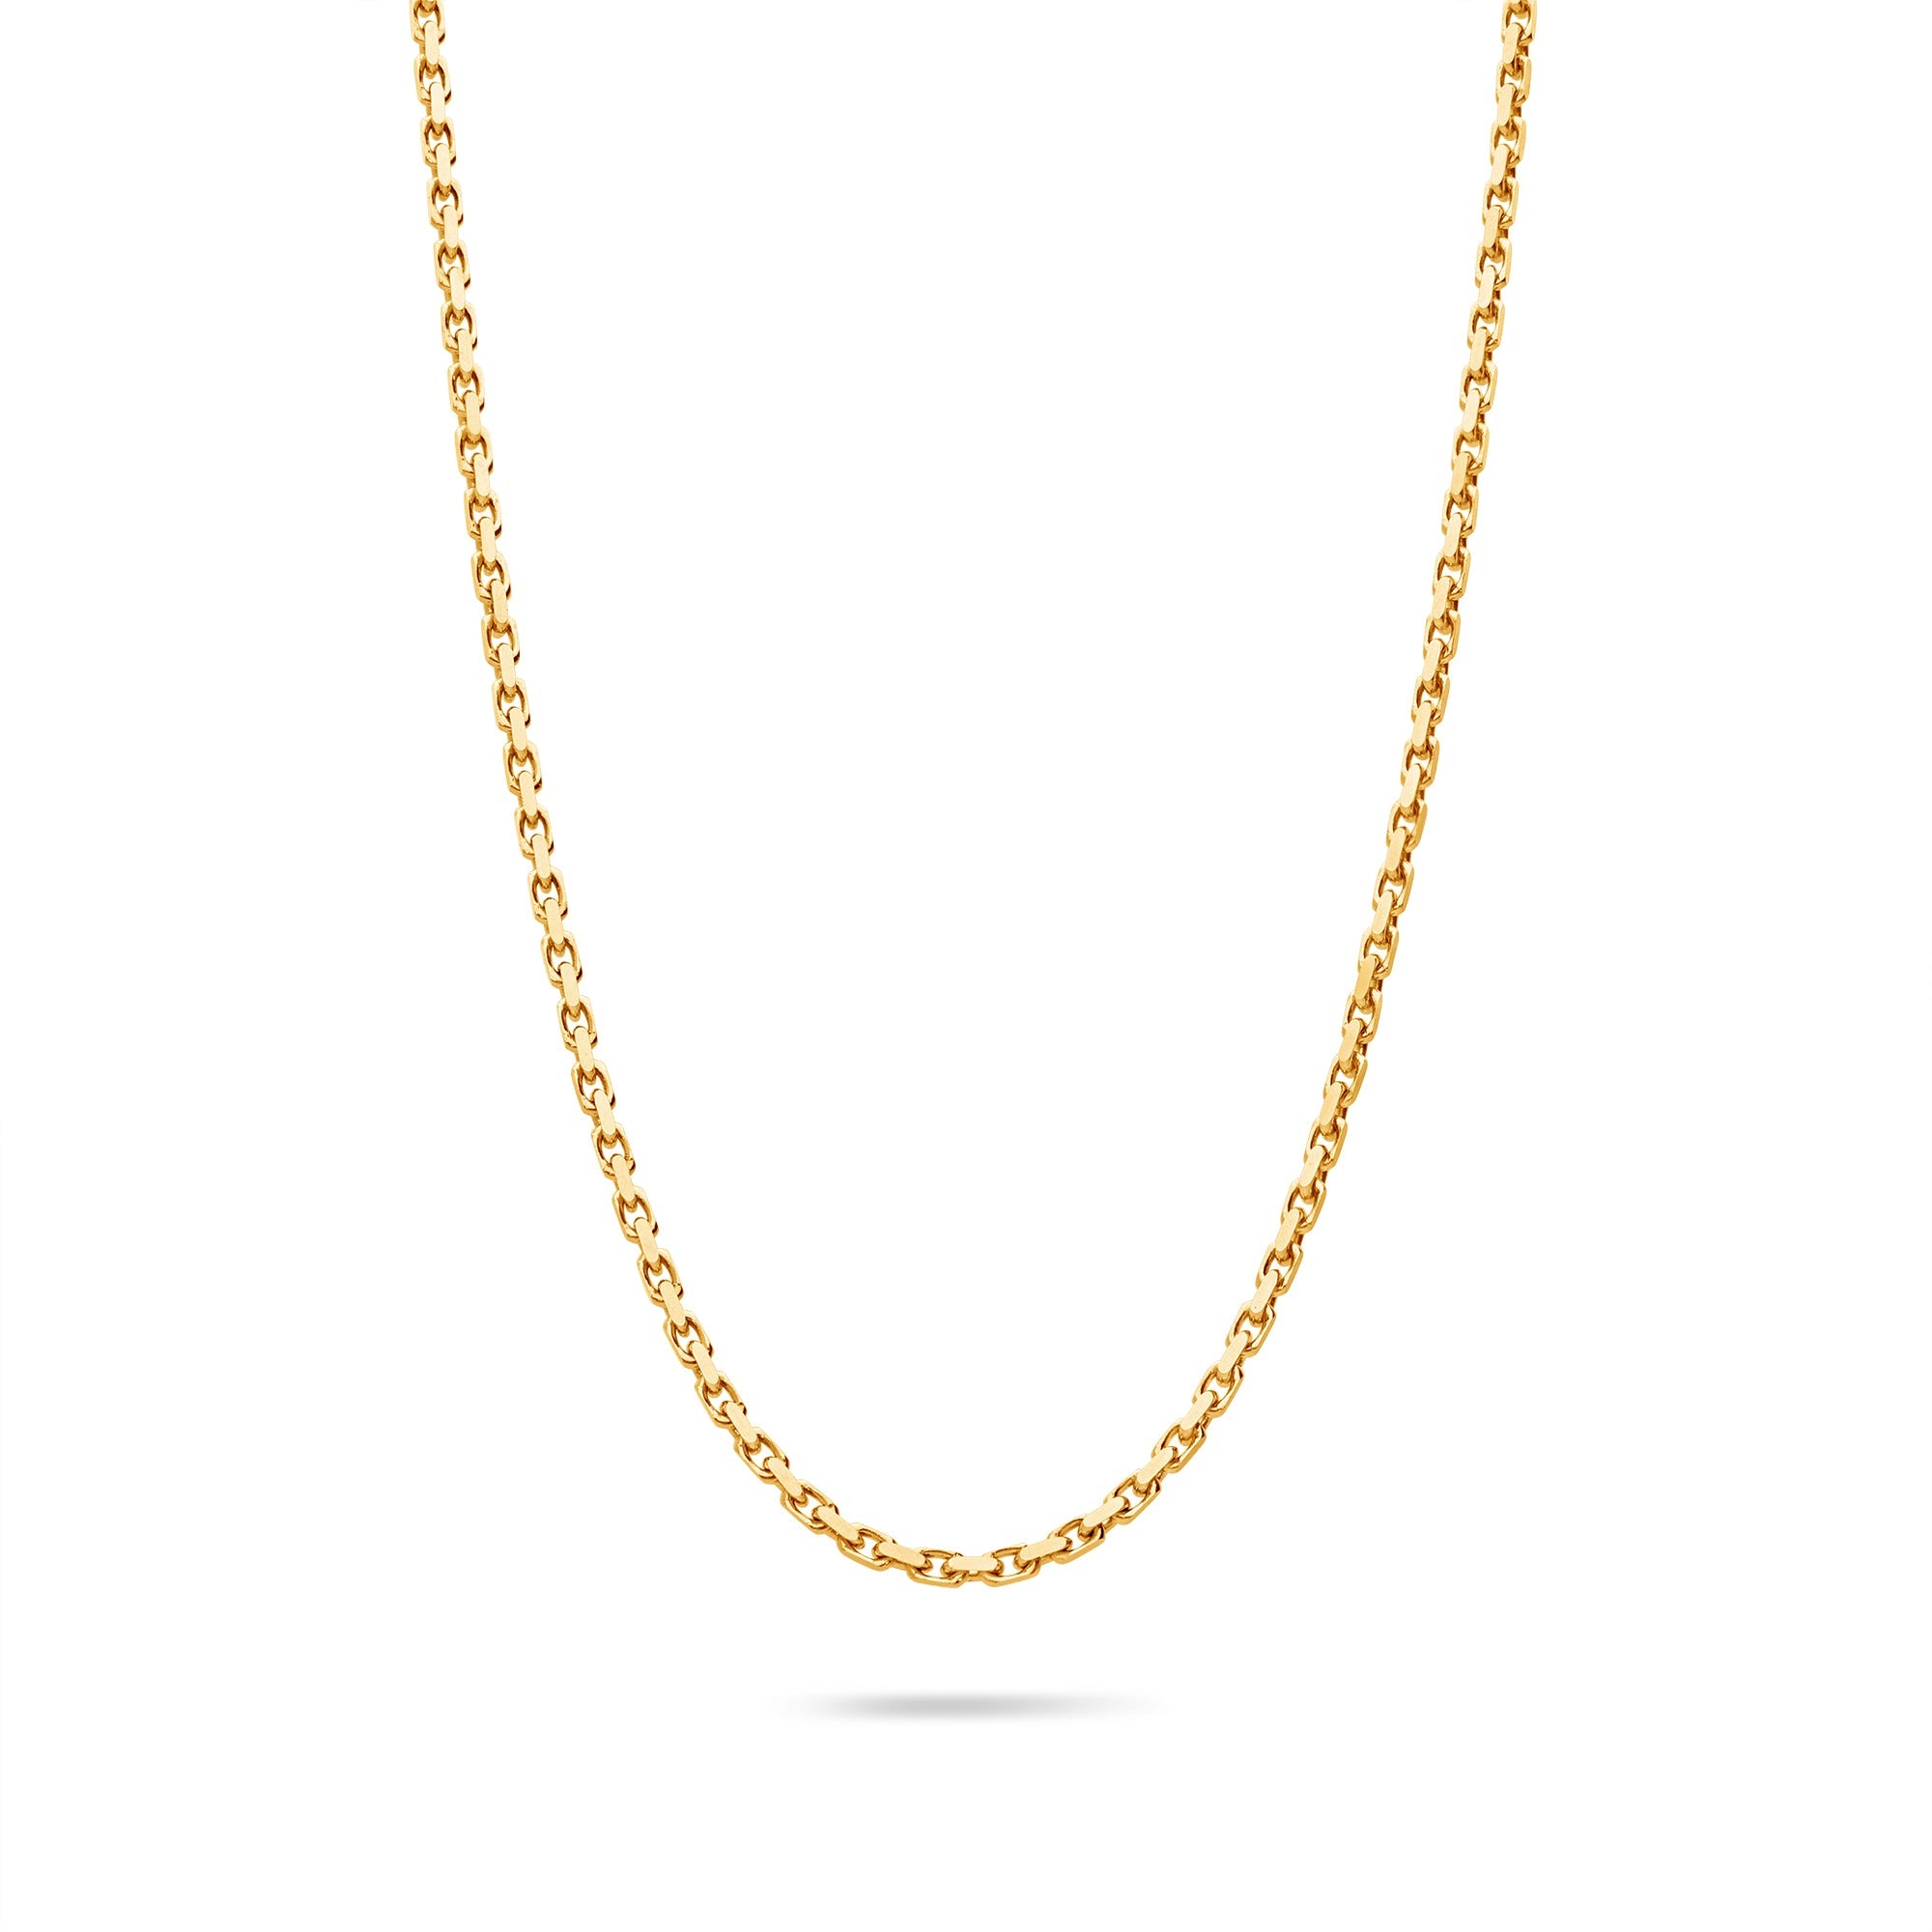 Gold Odin Link Chain (2mm) (14K YELLOW GOLD) - IF & Co. Custom Jewelers